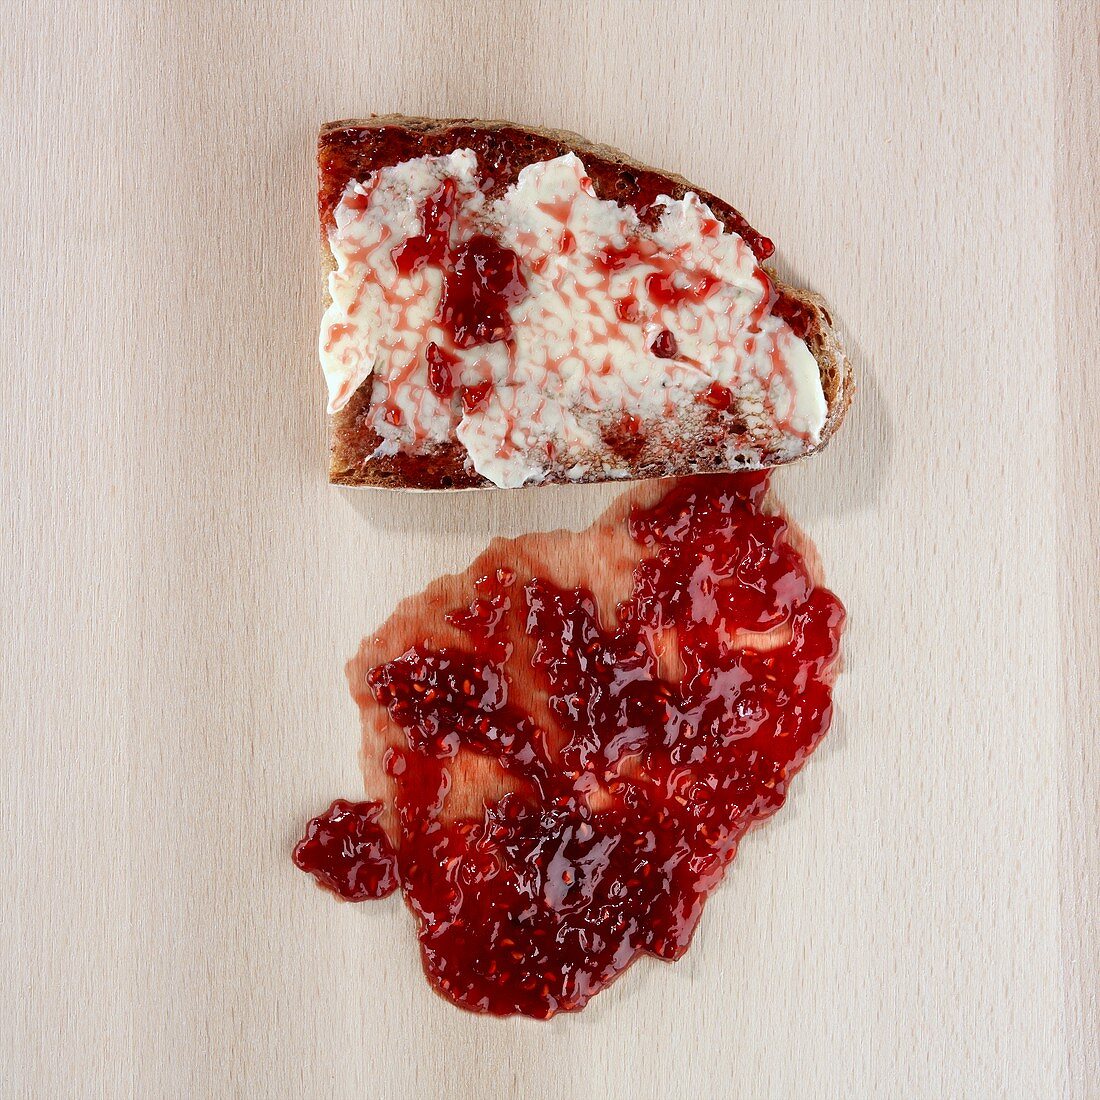 Jam and bread, dropped on the floor